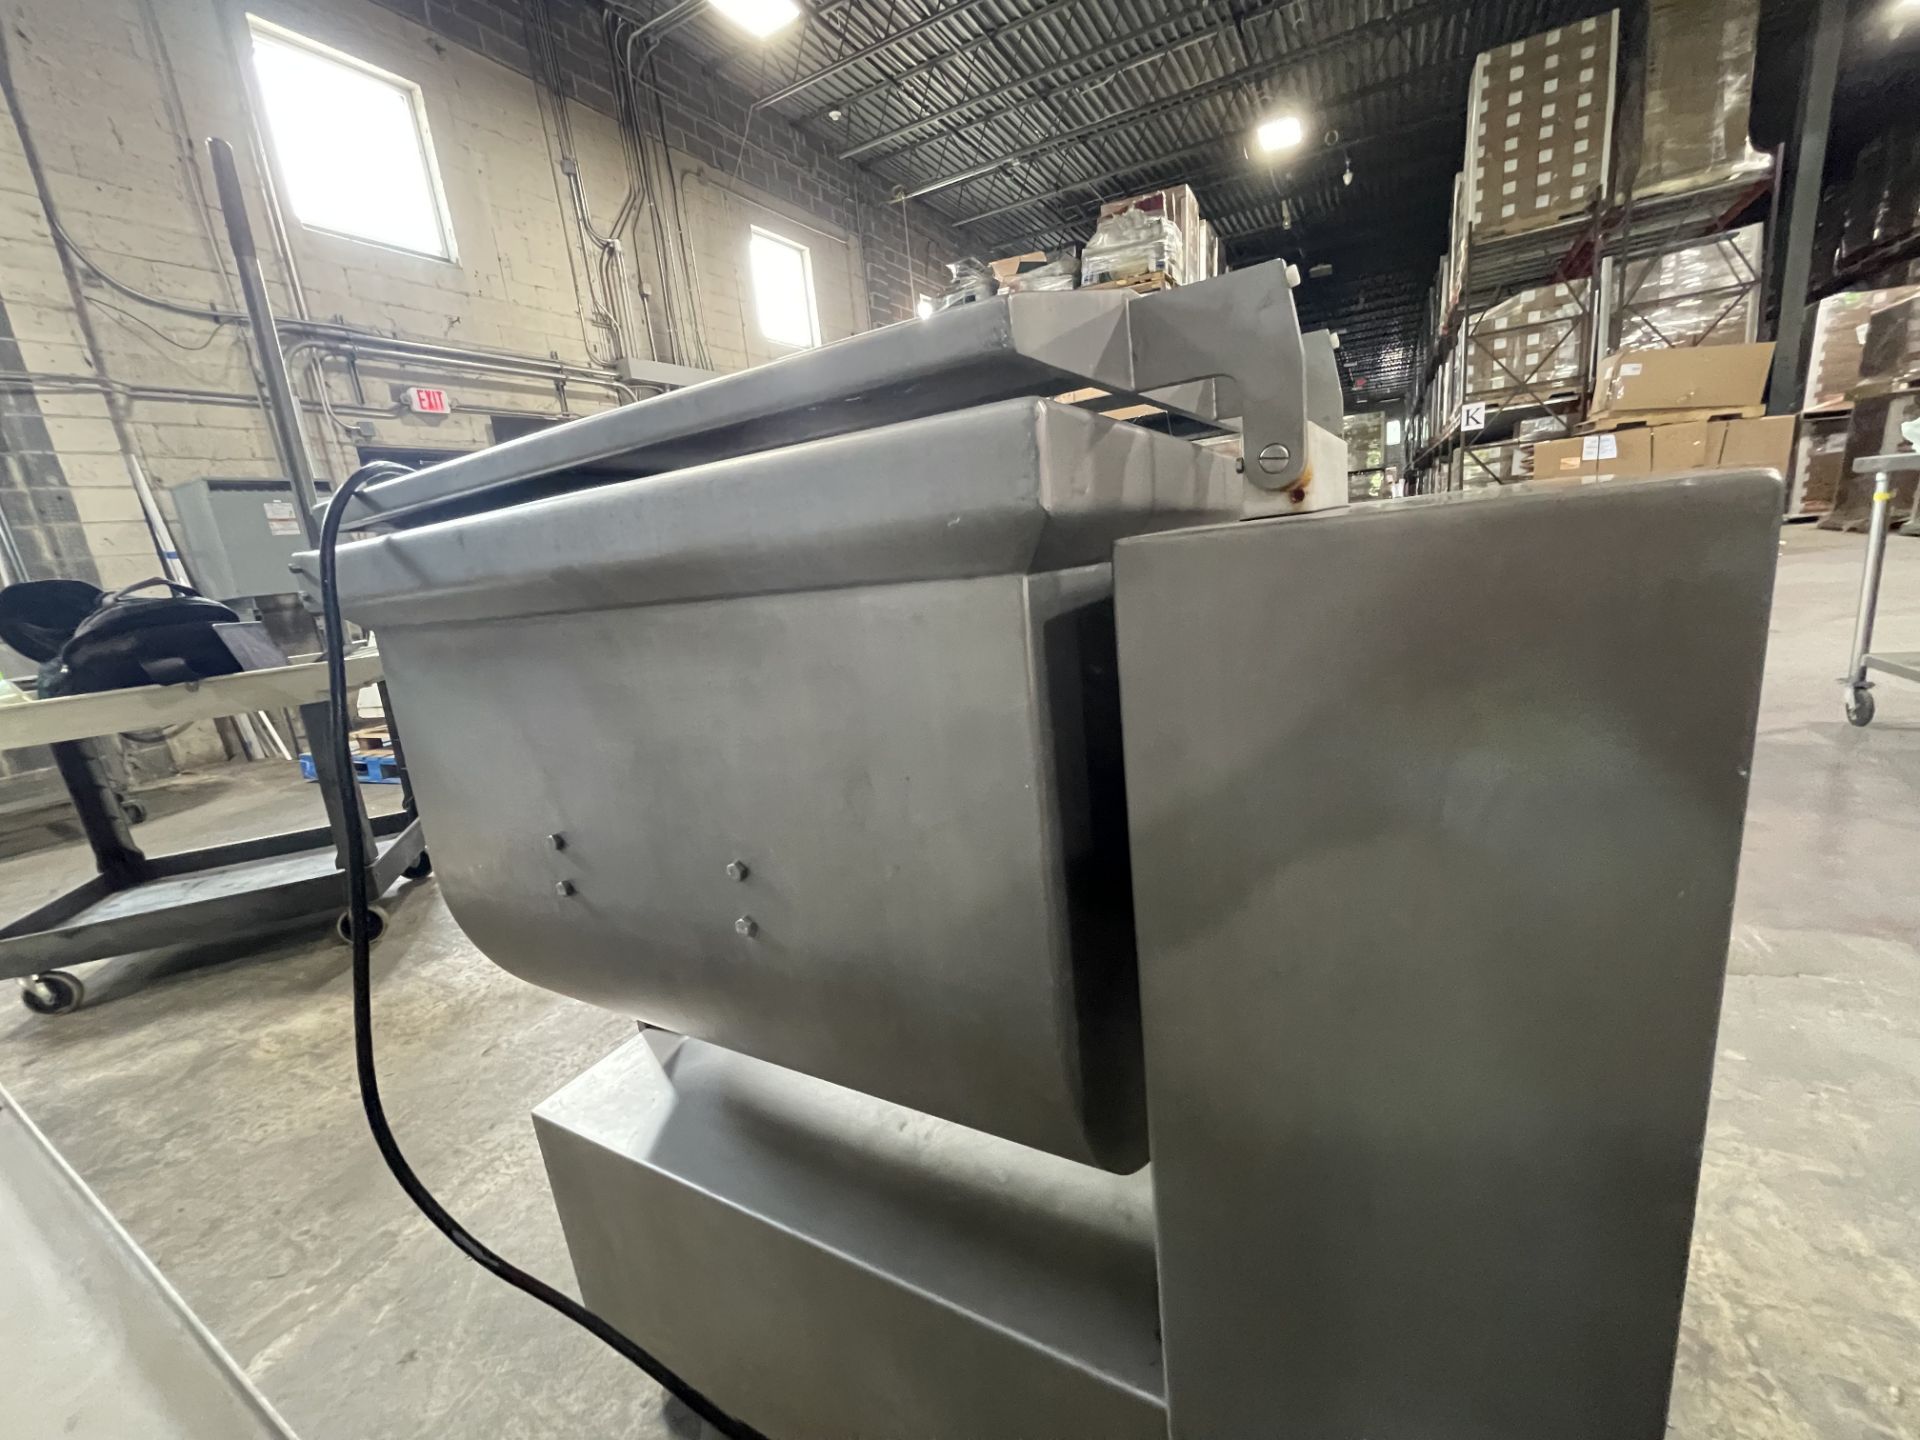 KOCH 5-CUBIC FOOT TILTING PADDLE BLENDER, MODEL A-150, S/N 1098 7-01, PORTABLE UNIT MOUNTED ON - Image 5 of 18